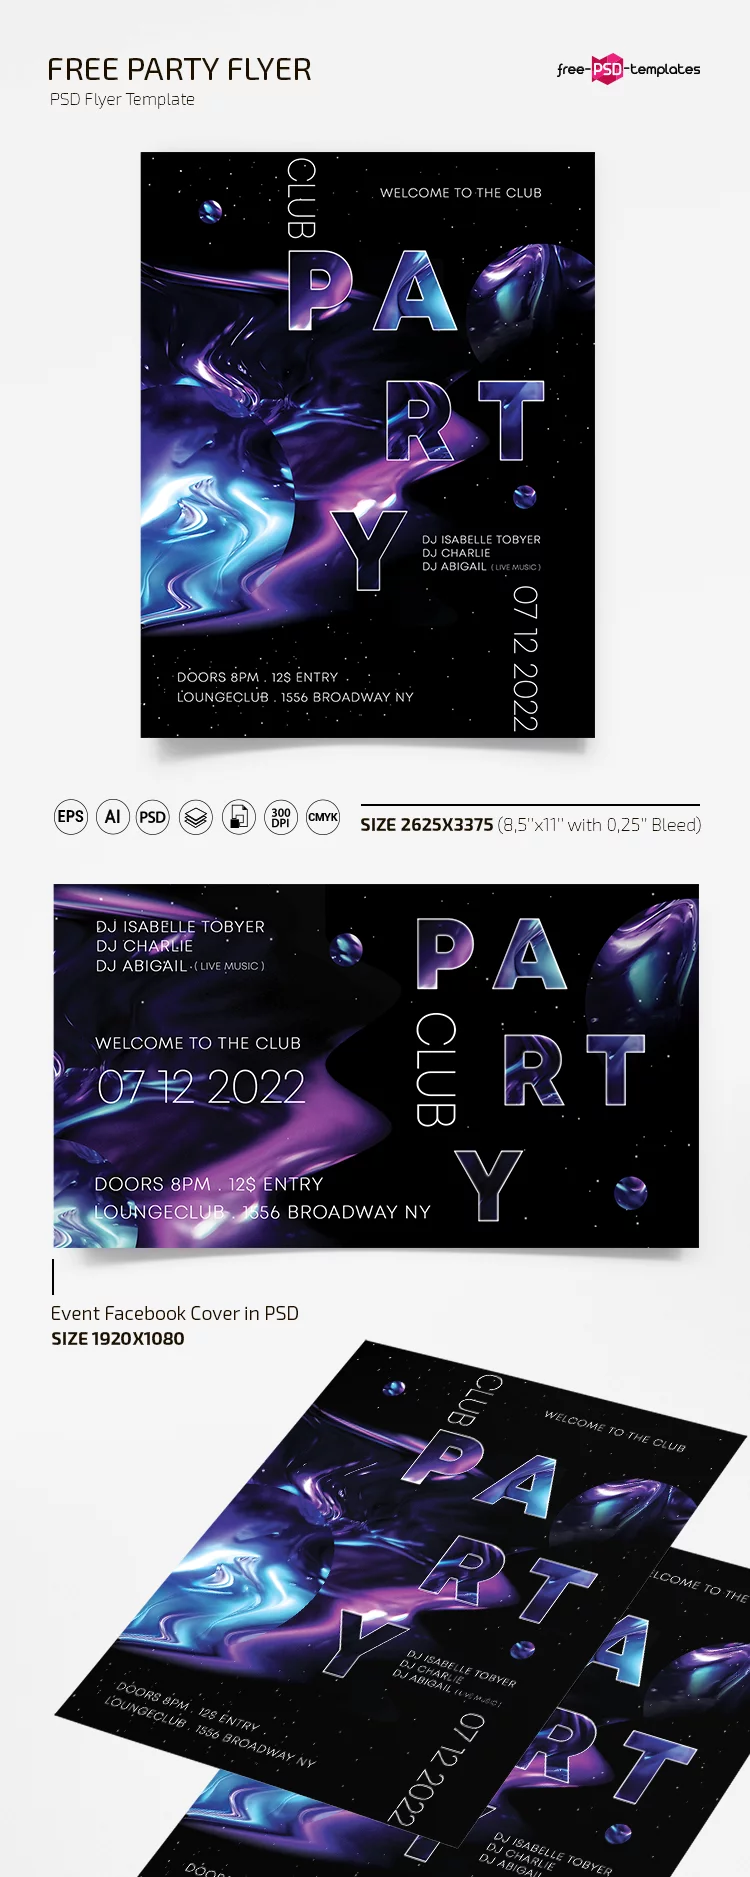 Free Party Flyer Template in PSD + AI